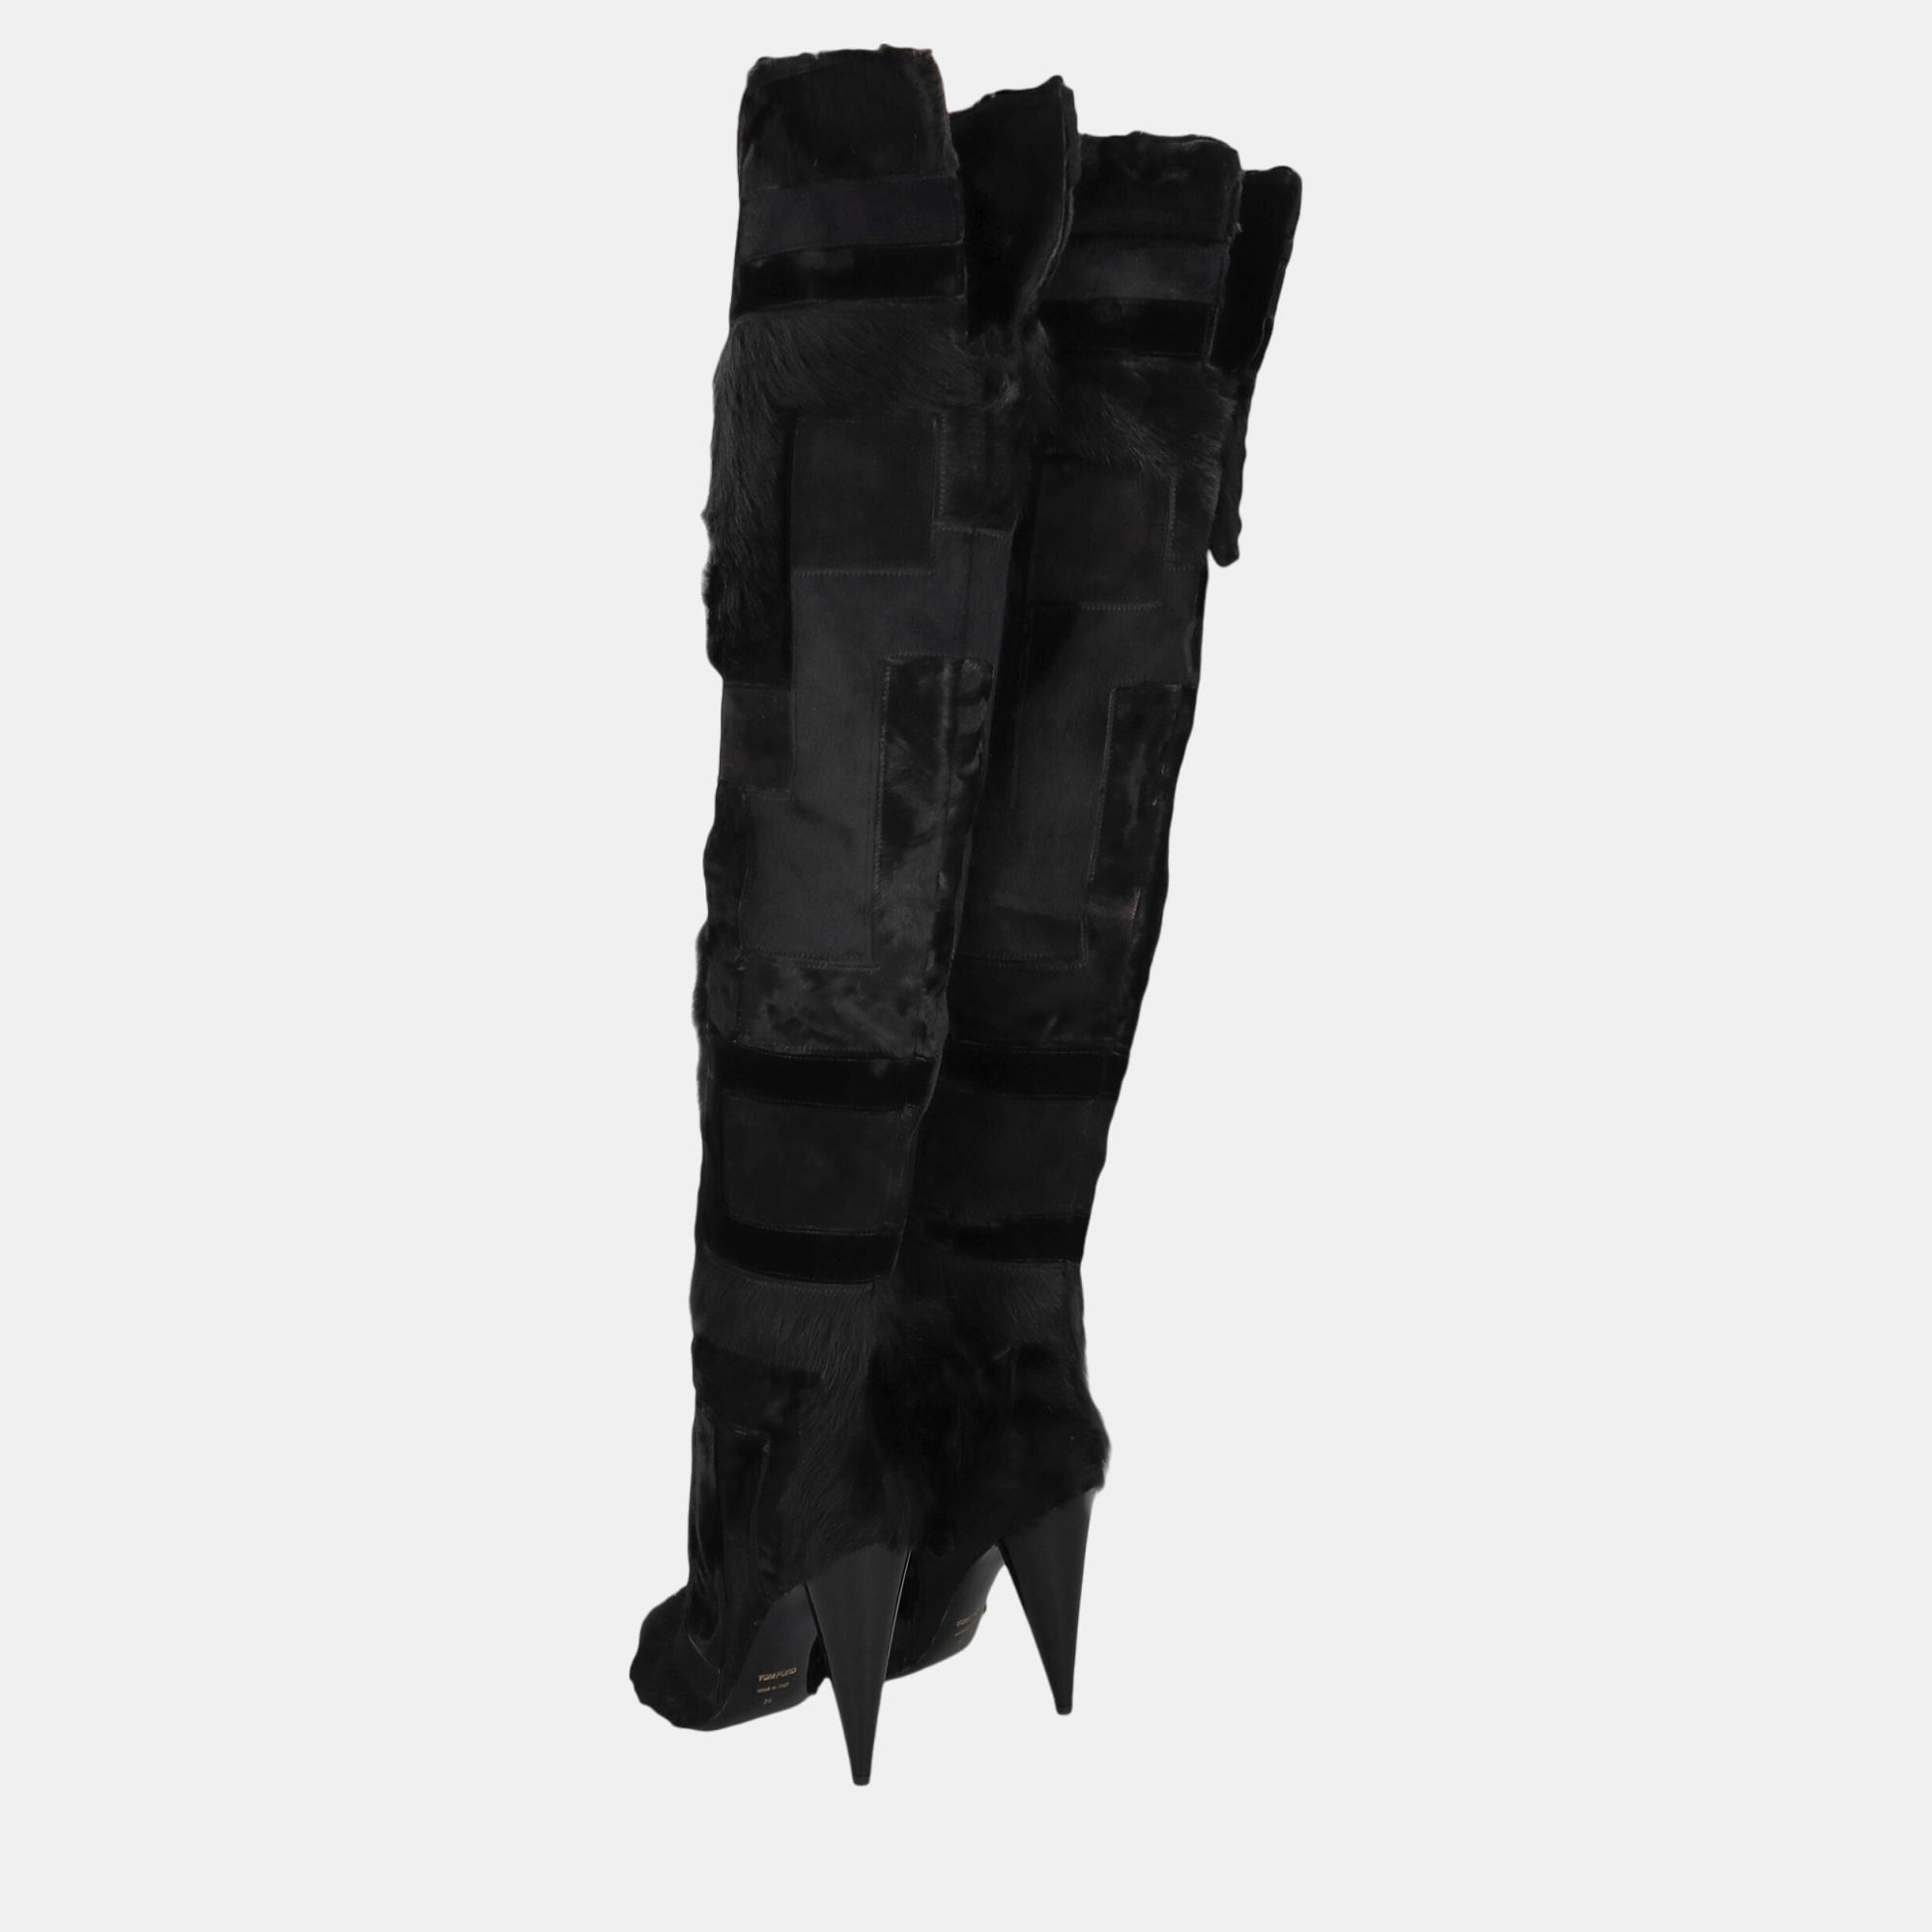 Tom Ford  Women's Leather Boots - Black - EU 39